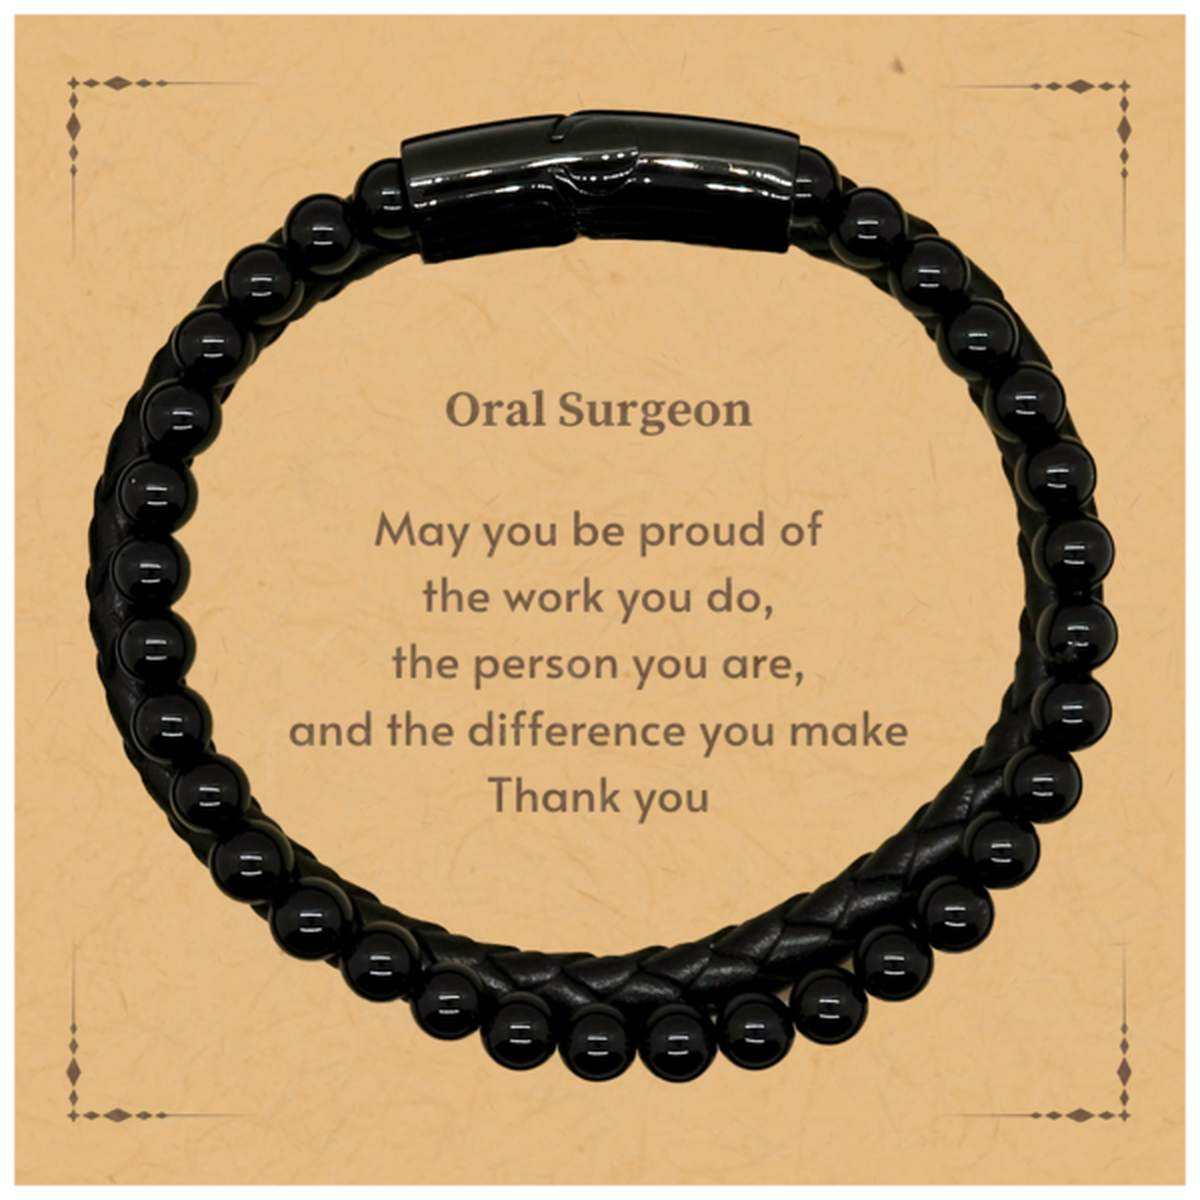 Heartwarming Stone Leather Bracelets Retirement Coworkers Gifts for Oral Surgeon, Oral Surgeon May You be proud of the work you do, the person you are Gifts for Boss Men Women Friends